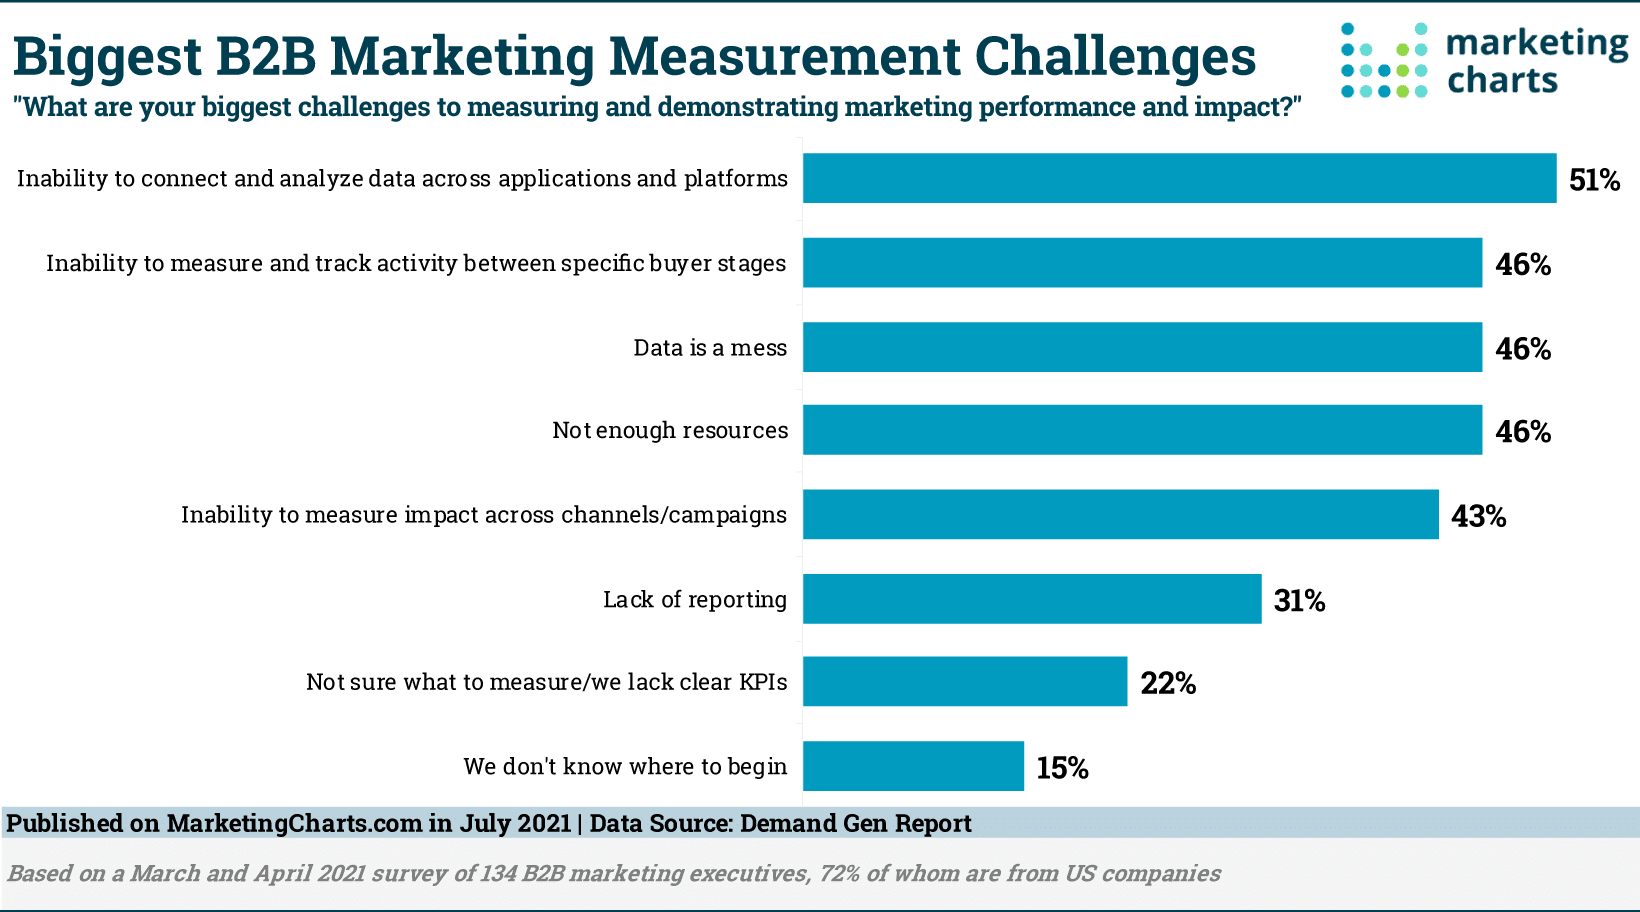 Studies show that marketers still have a hard time finding the right metrics to determine the content that converts.